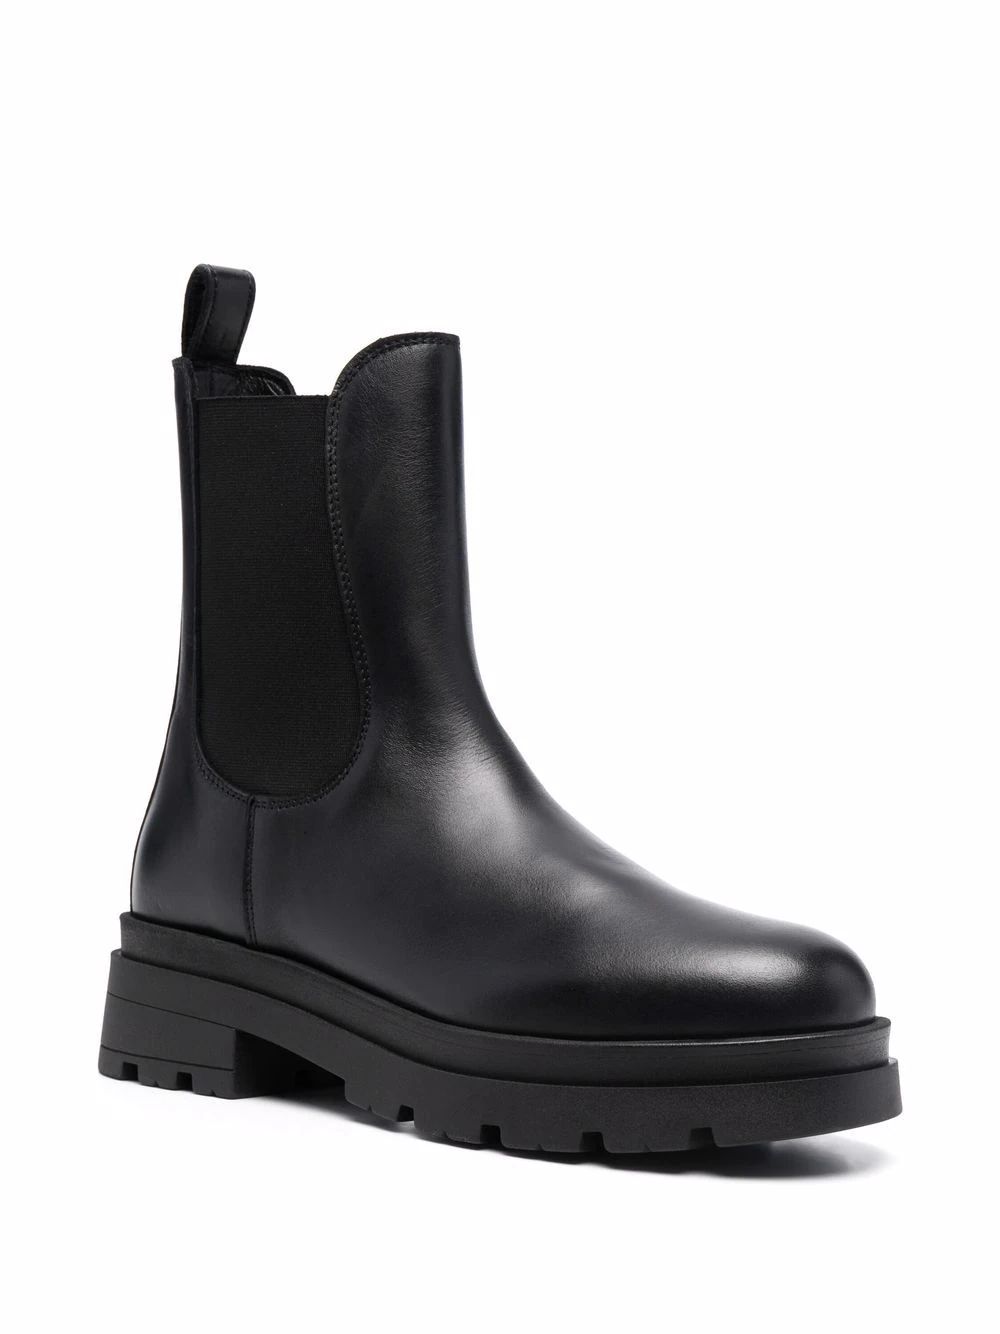 slip-on leather boots | Farfetch (US)